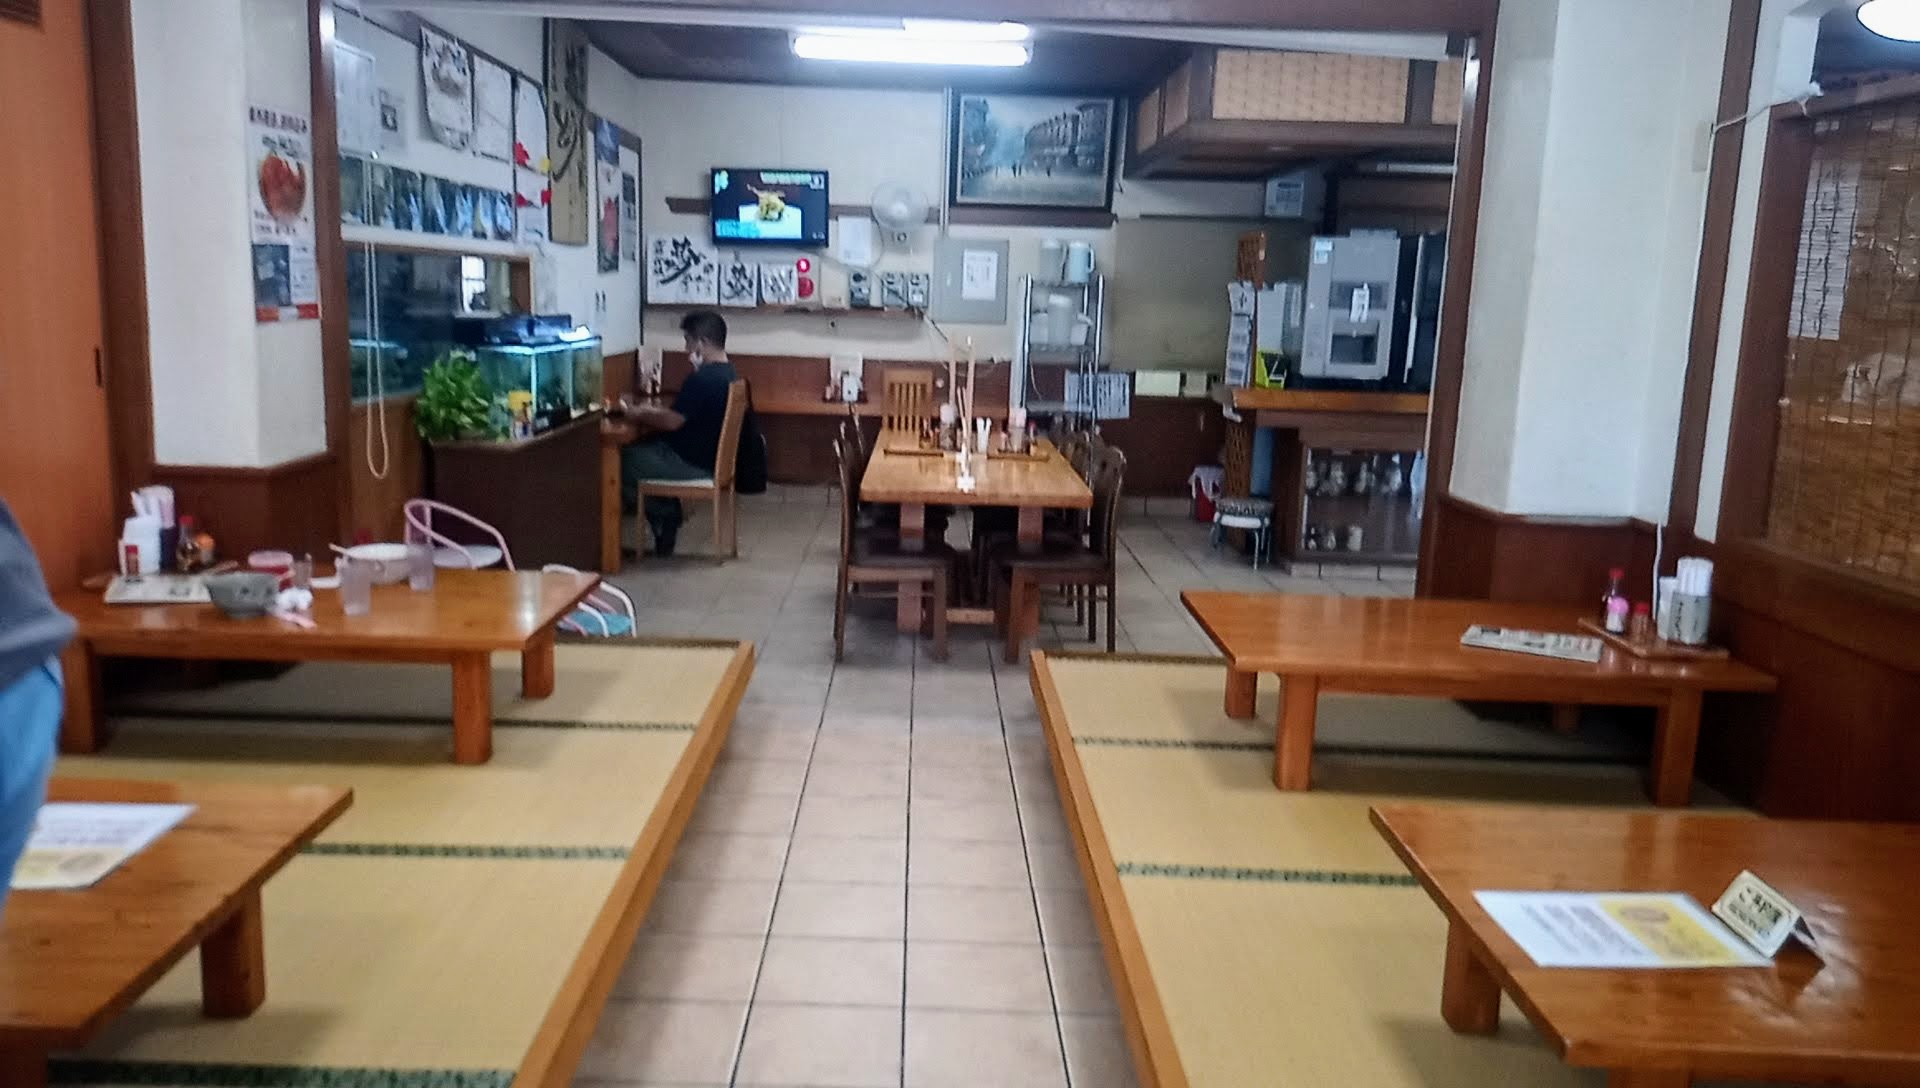 This is what the interior of Awase Soba Restaurant looks like 2